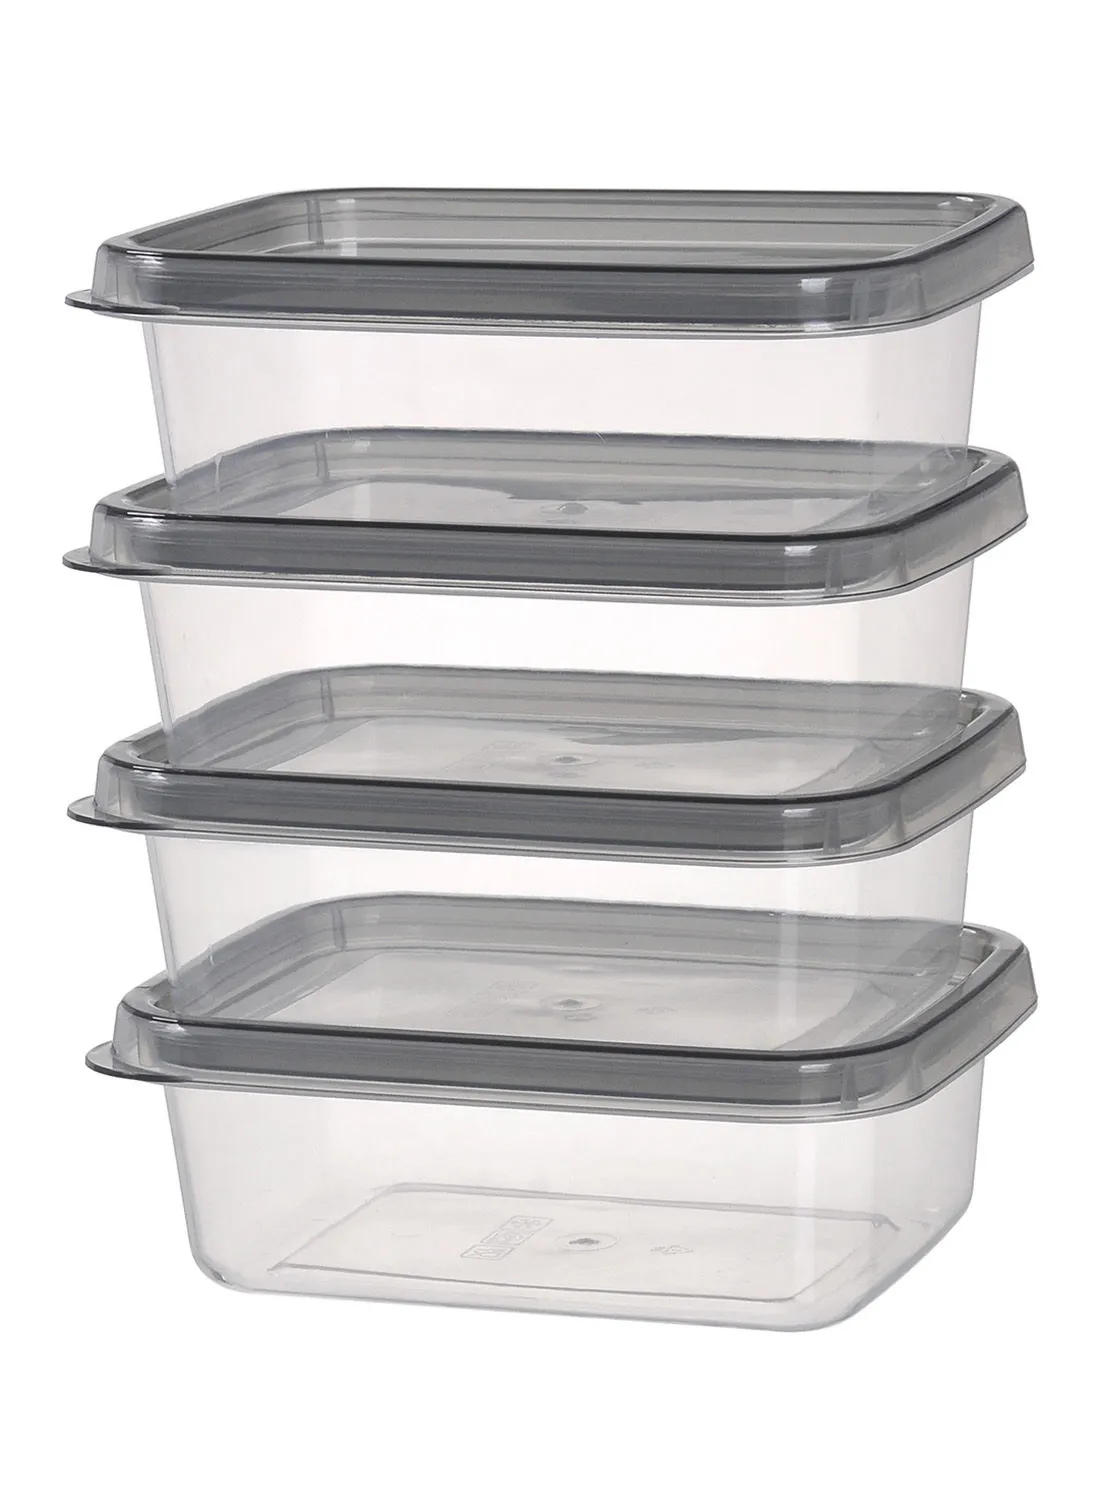 Amal 4 Piece Plastic Food Container Set - Spill Proof Lids - Food Storage Box - Storage Boxes - Kitchen Cabinet Organizers - Grey